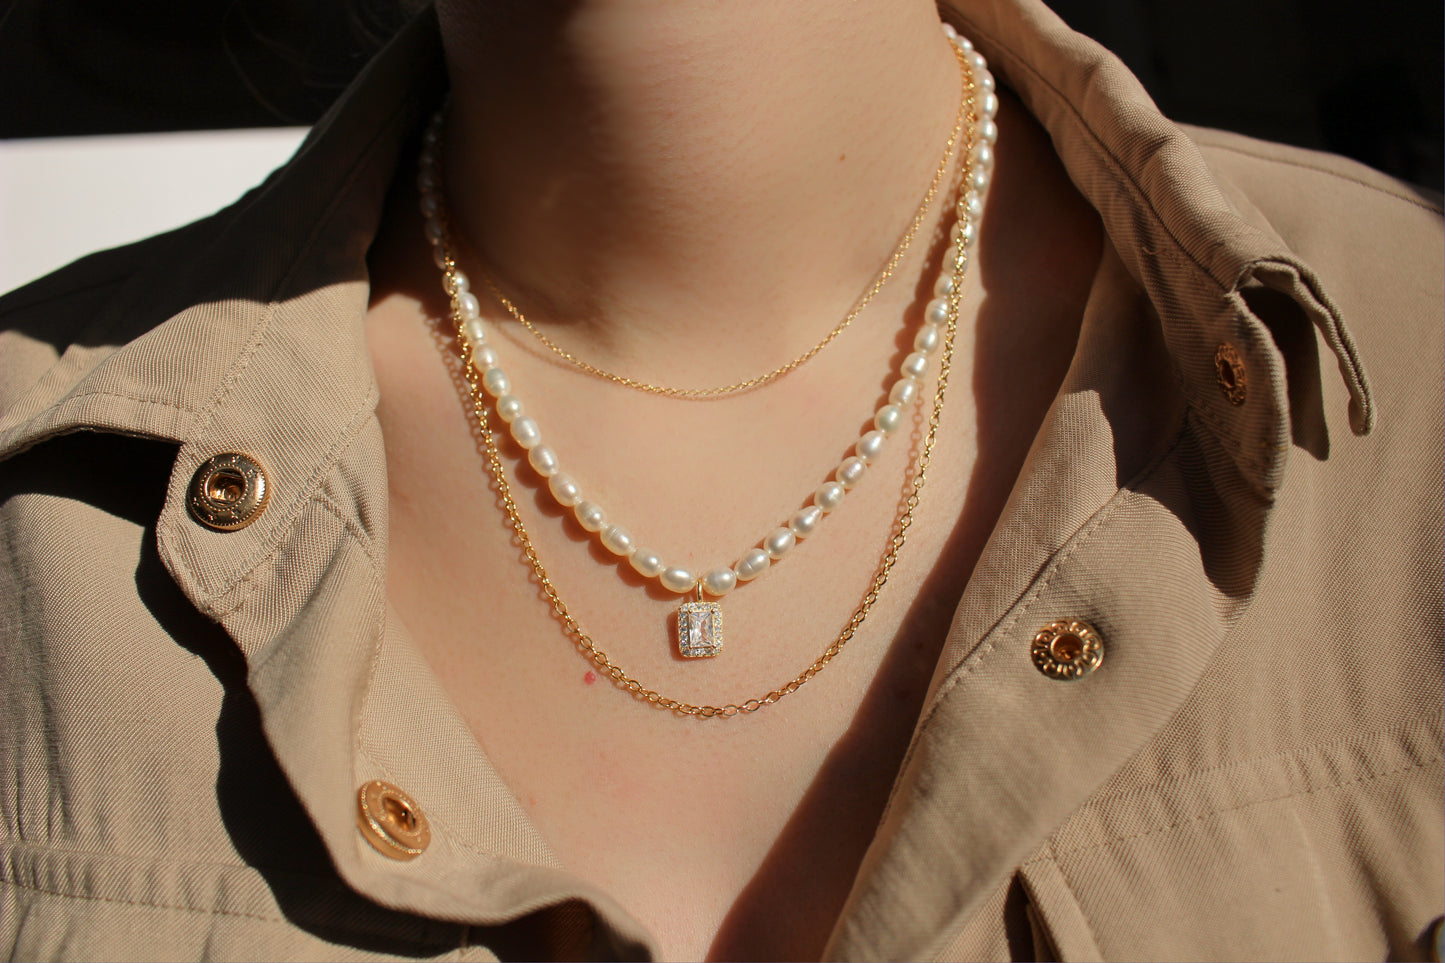 LUXE - Freshwater Pearl Choker Necklace and Sterling Silver Zircon Pendant